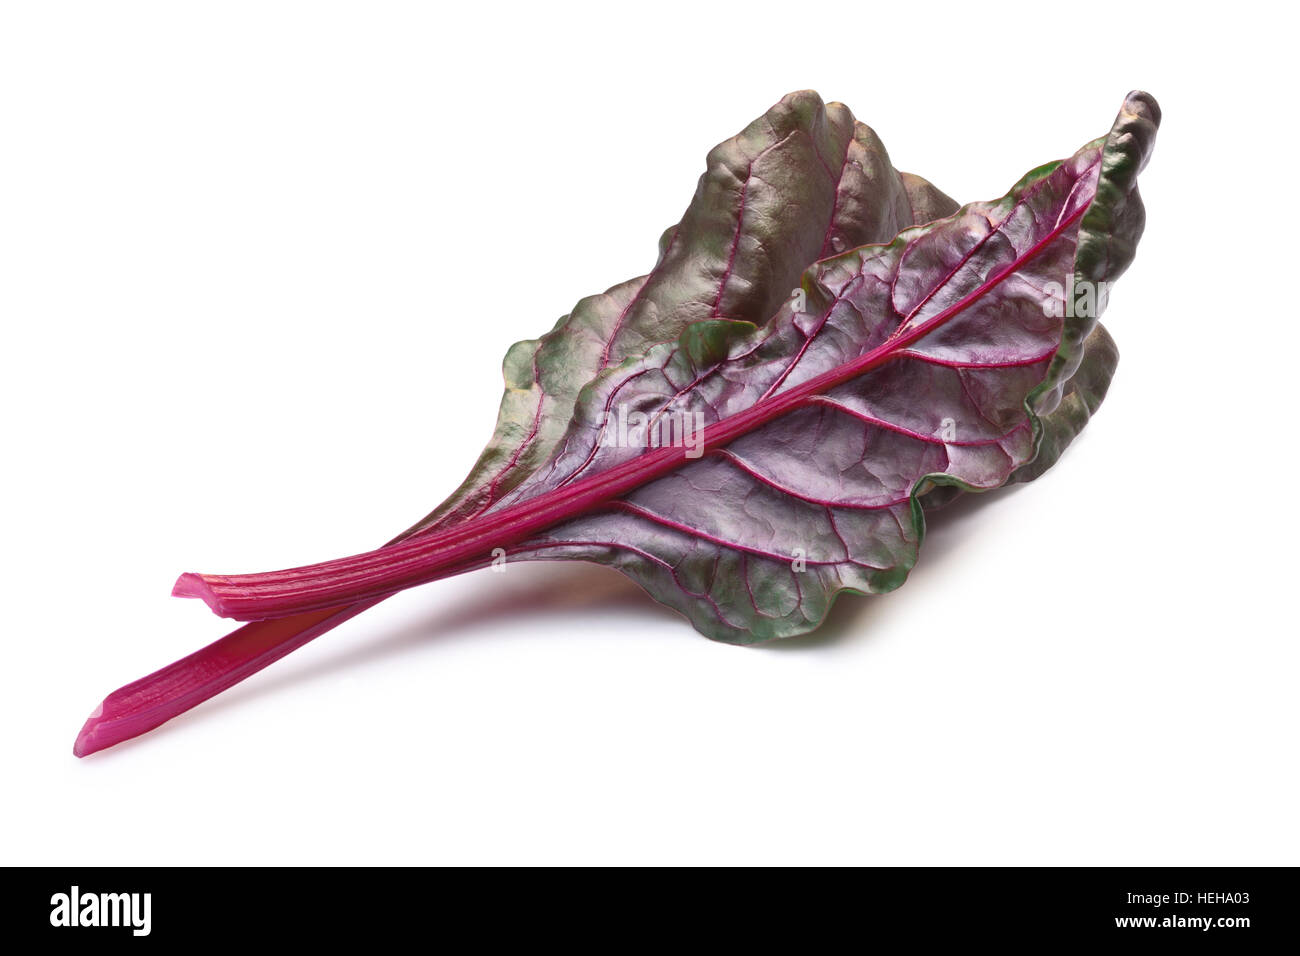 Overturned leaves of Swiss chard or Mangold (Beta vulgaris subsp. Cicla-Group). Clipping paths, shadows separated Stock Photo